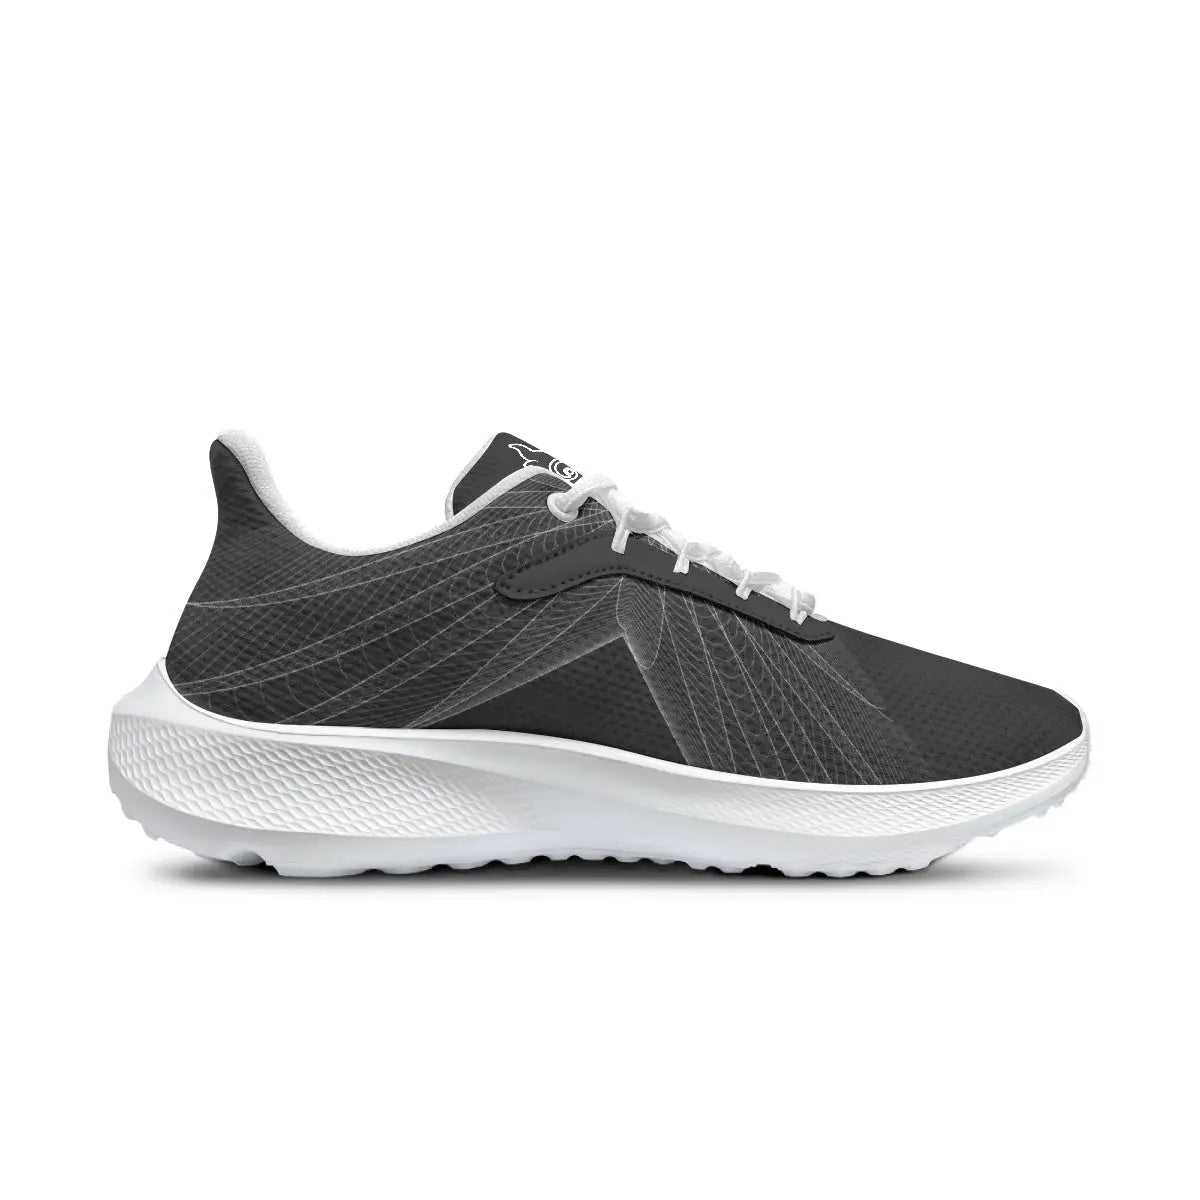 ActSun Running Shoes - Image #5